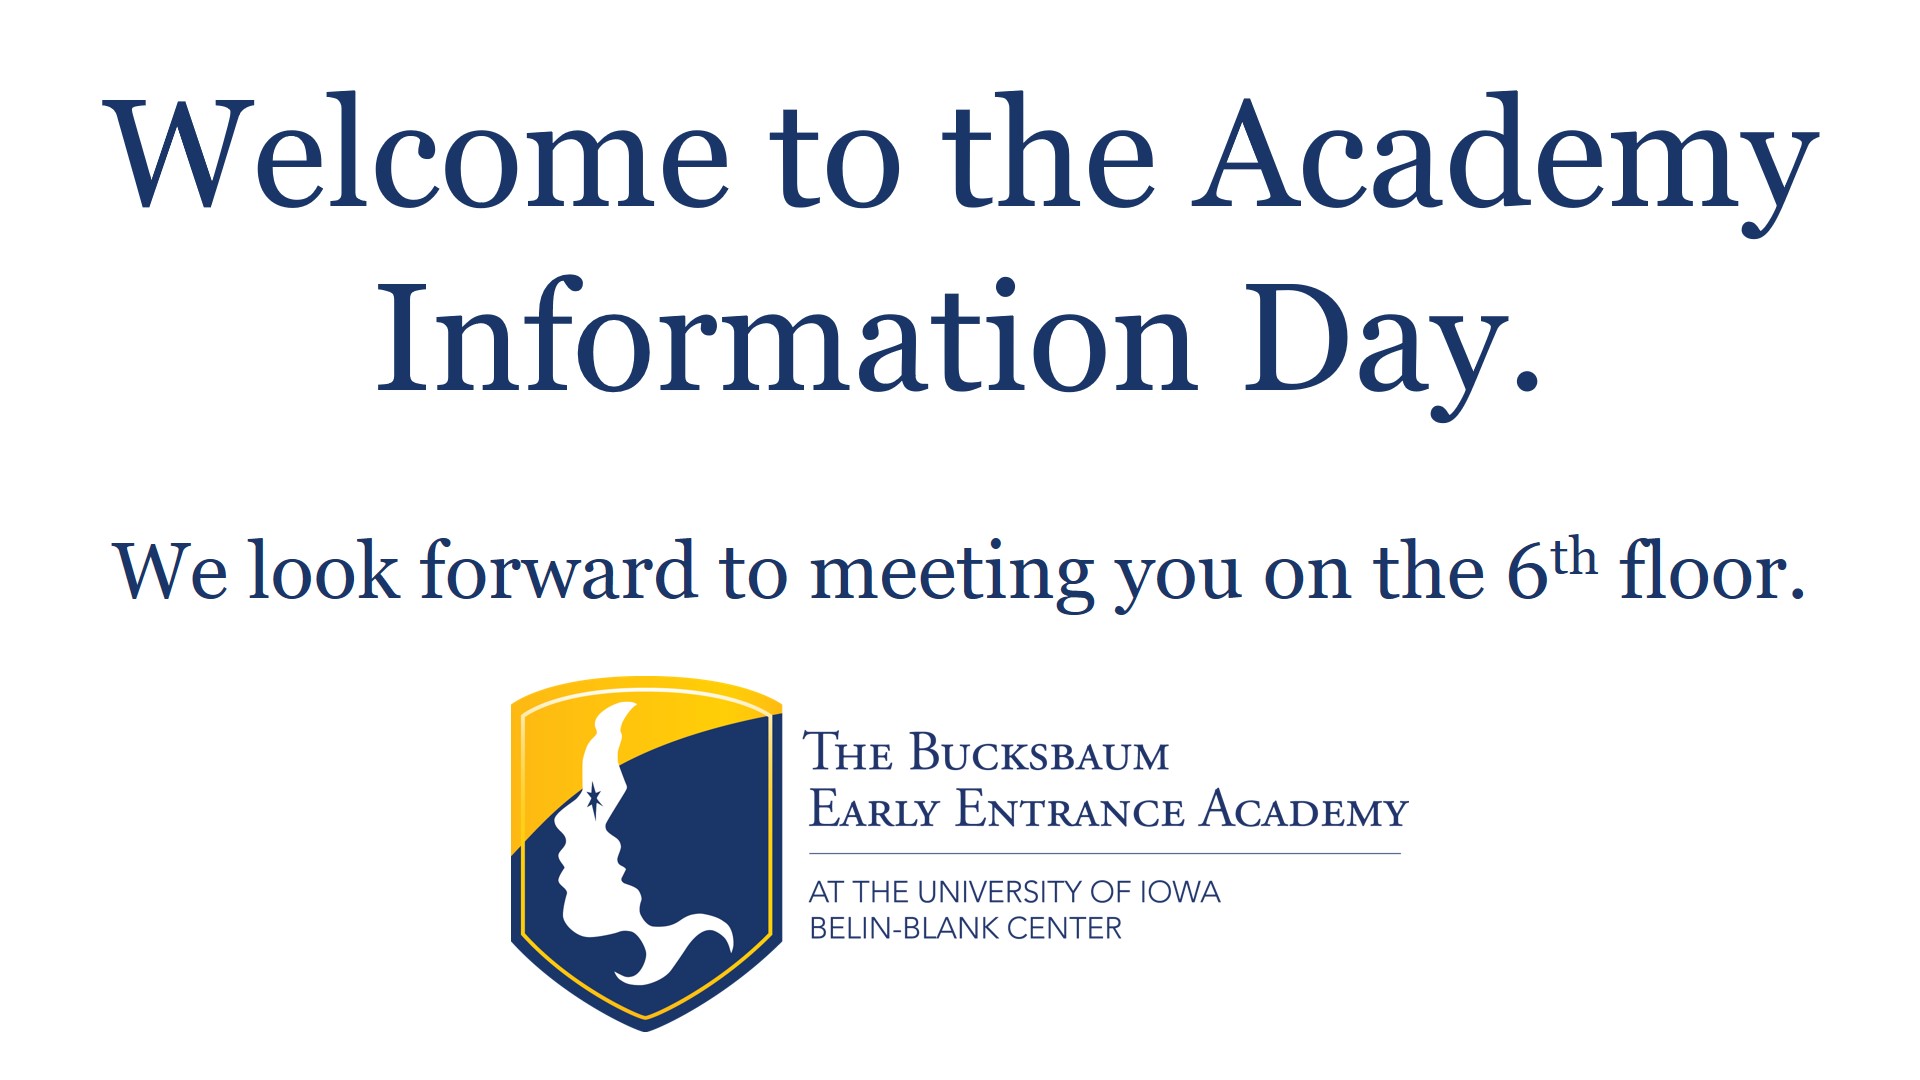 Welcome to the Academy Information Day